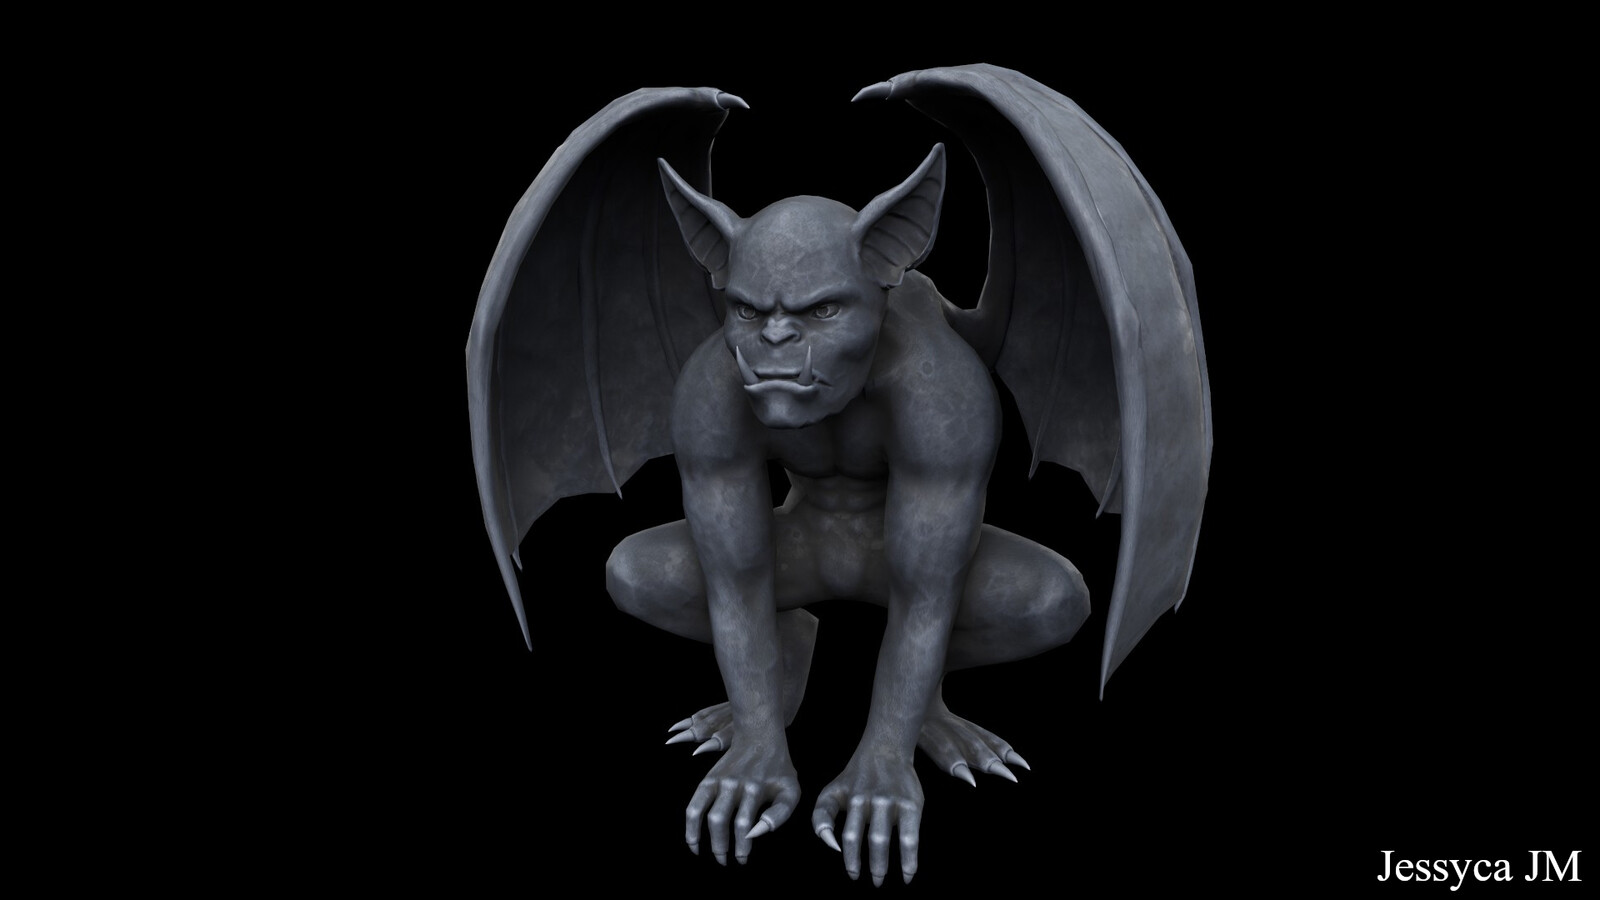 Render made in Substance Painter in order to have a better view on the work that has been done on the textures. I was aiming to give the gargoyle a soft rocky feel.